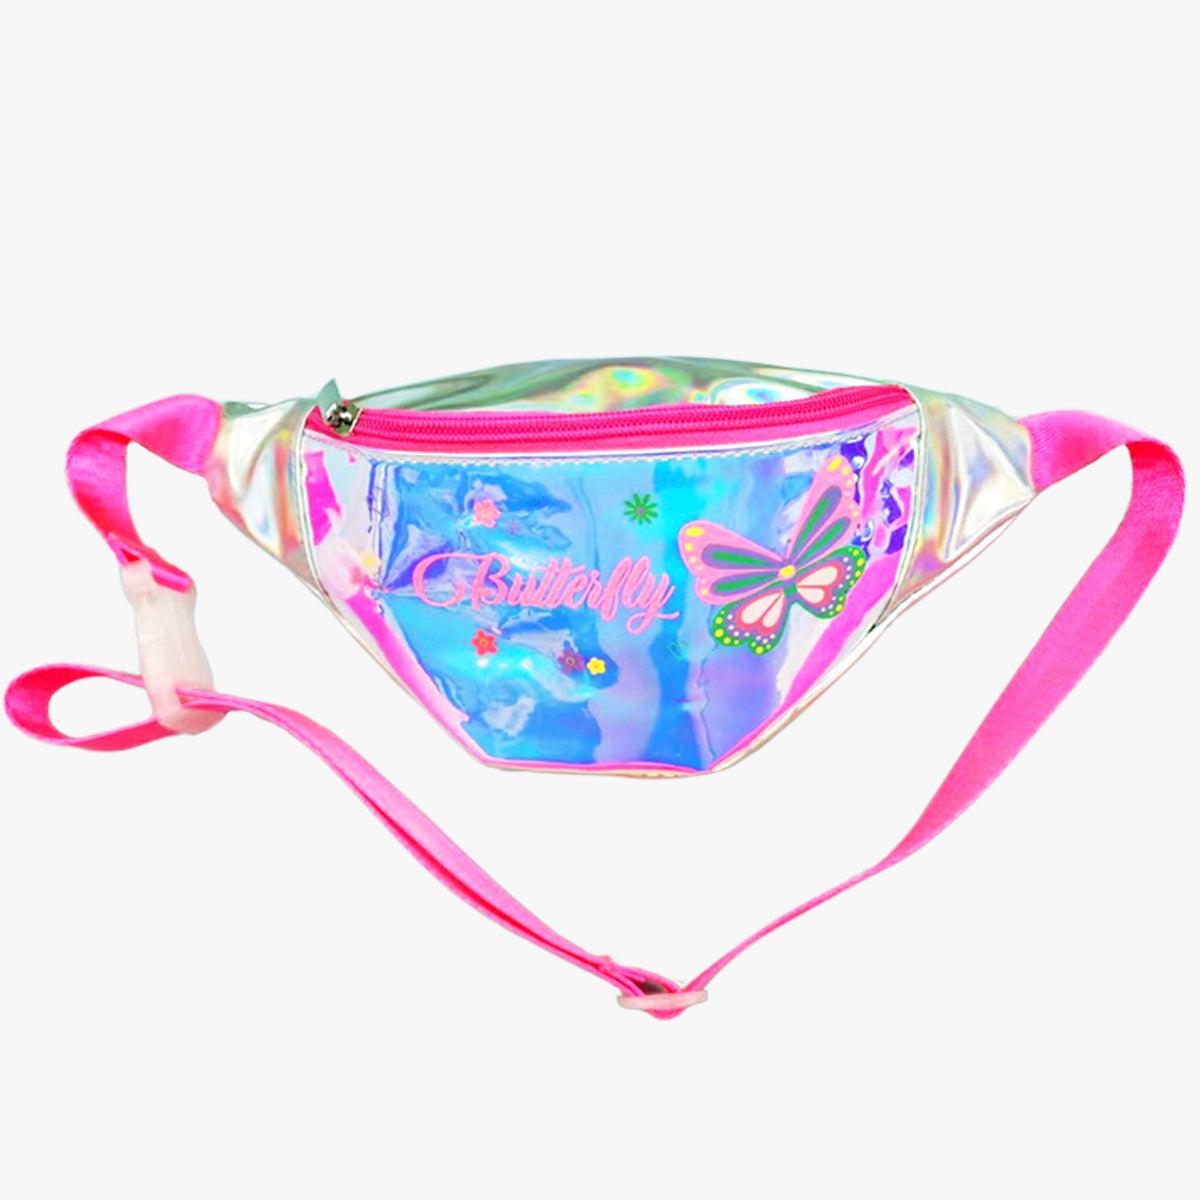 Pink Strap Butterfly Kidcore Waist Bag • Aesthetic Shop